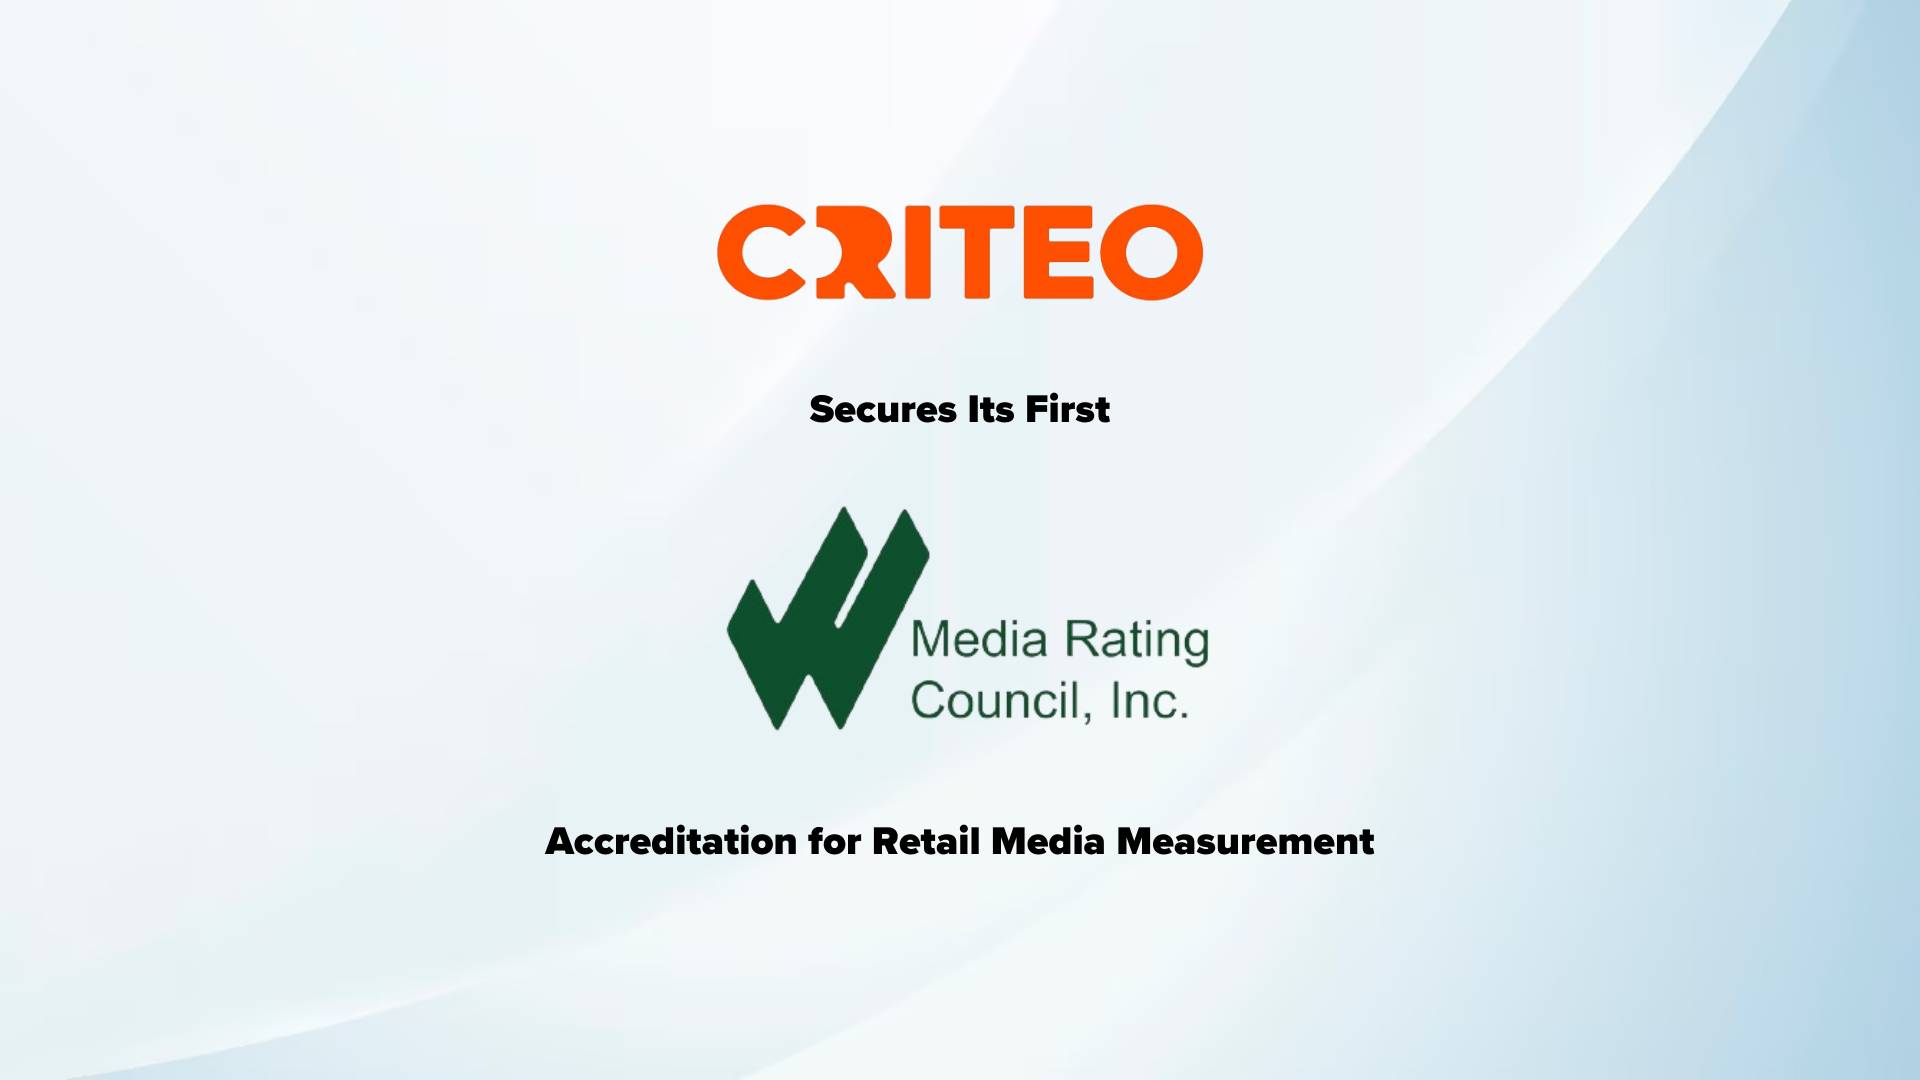 Criteo Secures Its First MRC Accreditation for Retail Media Measurement